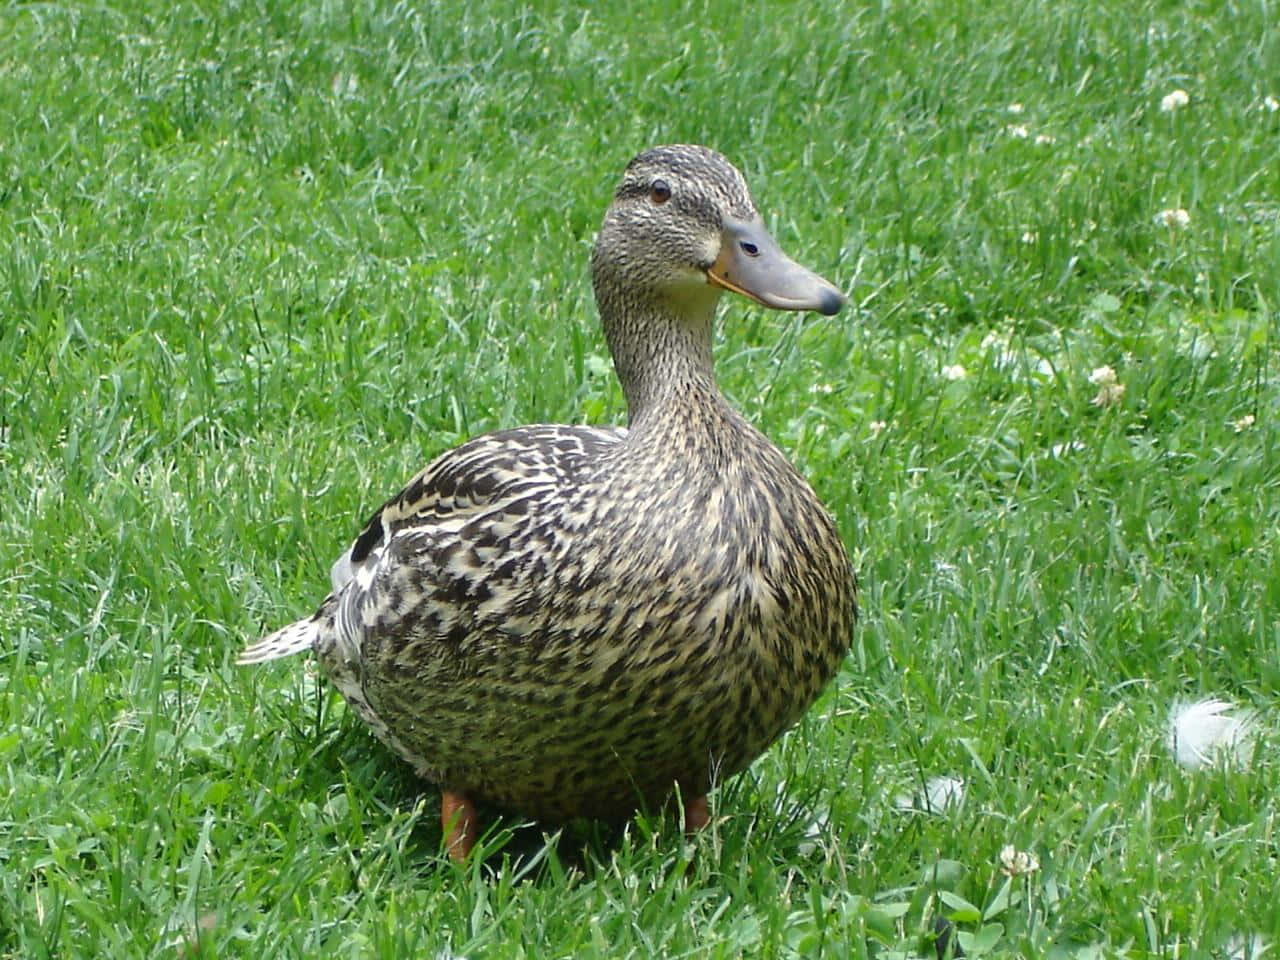 A Smiling Yellow Duck With Bright, Orange Feet